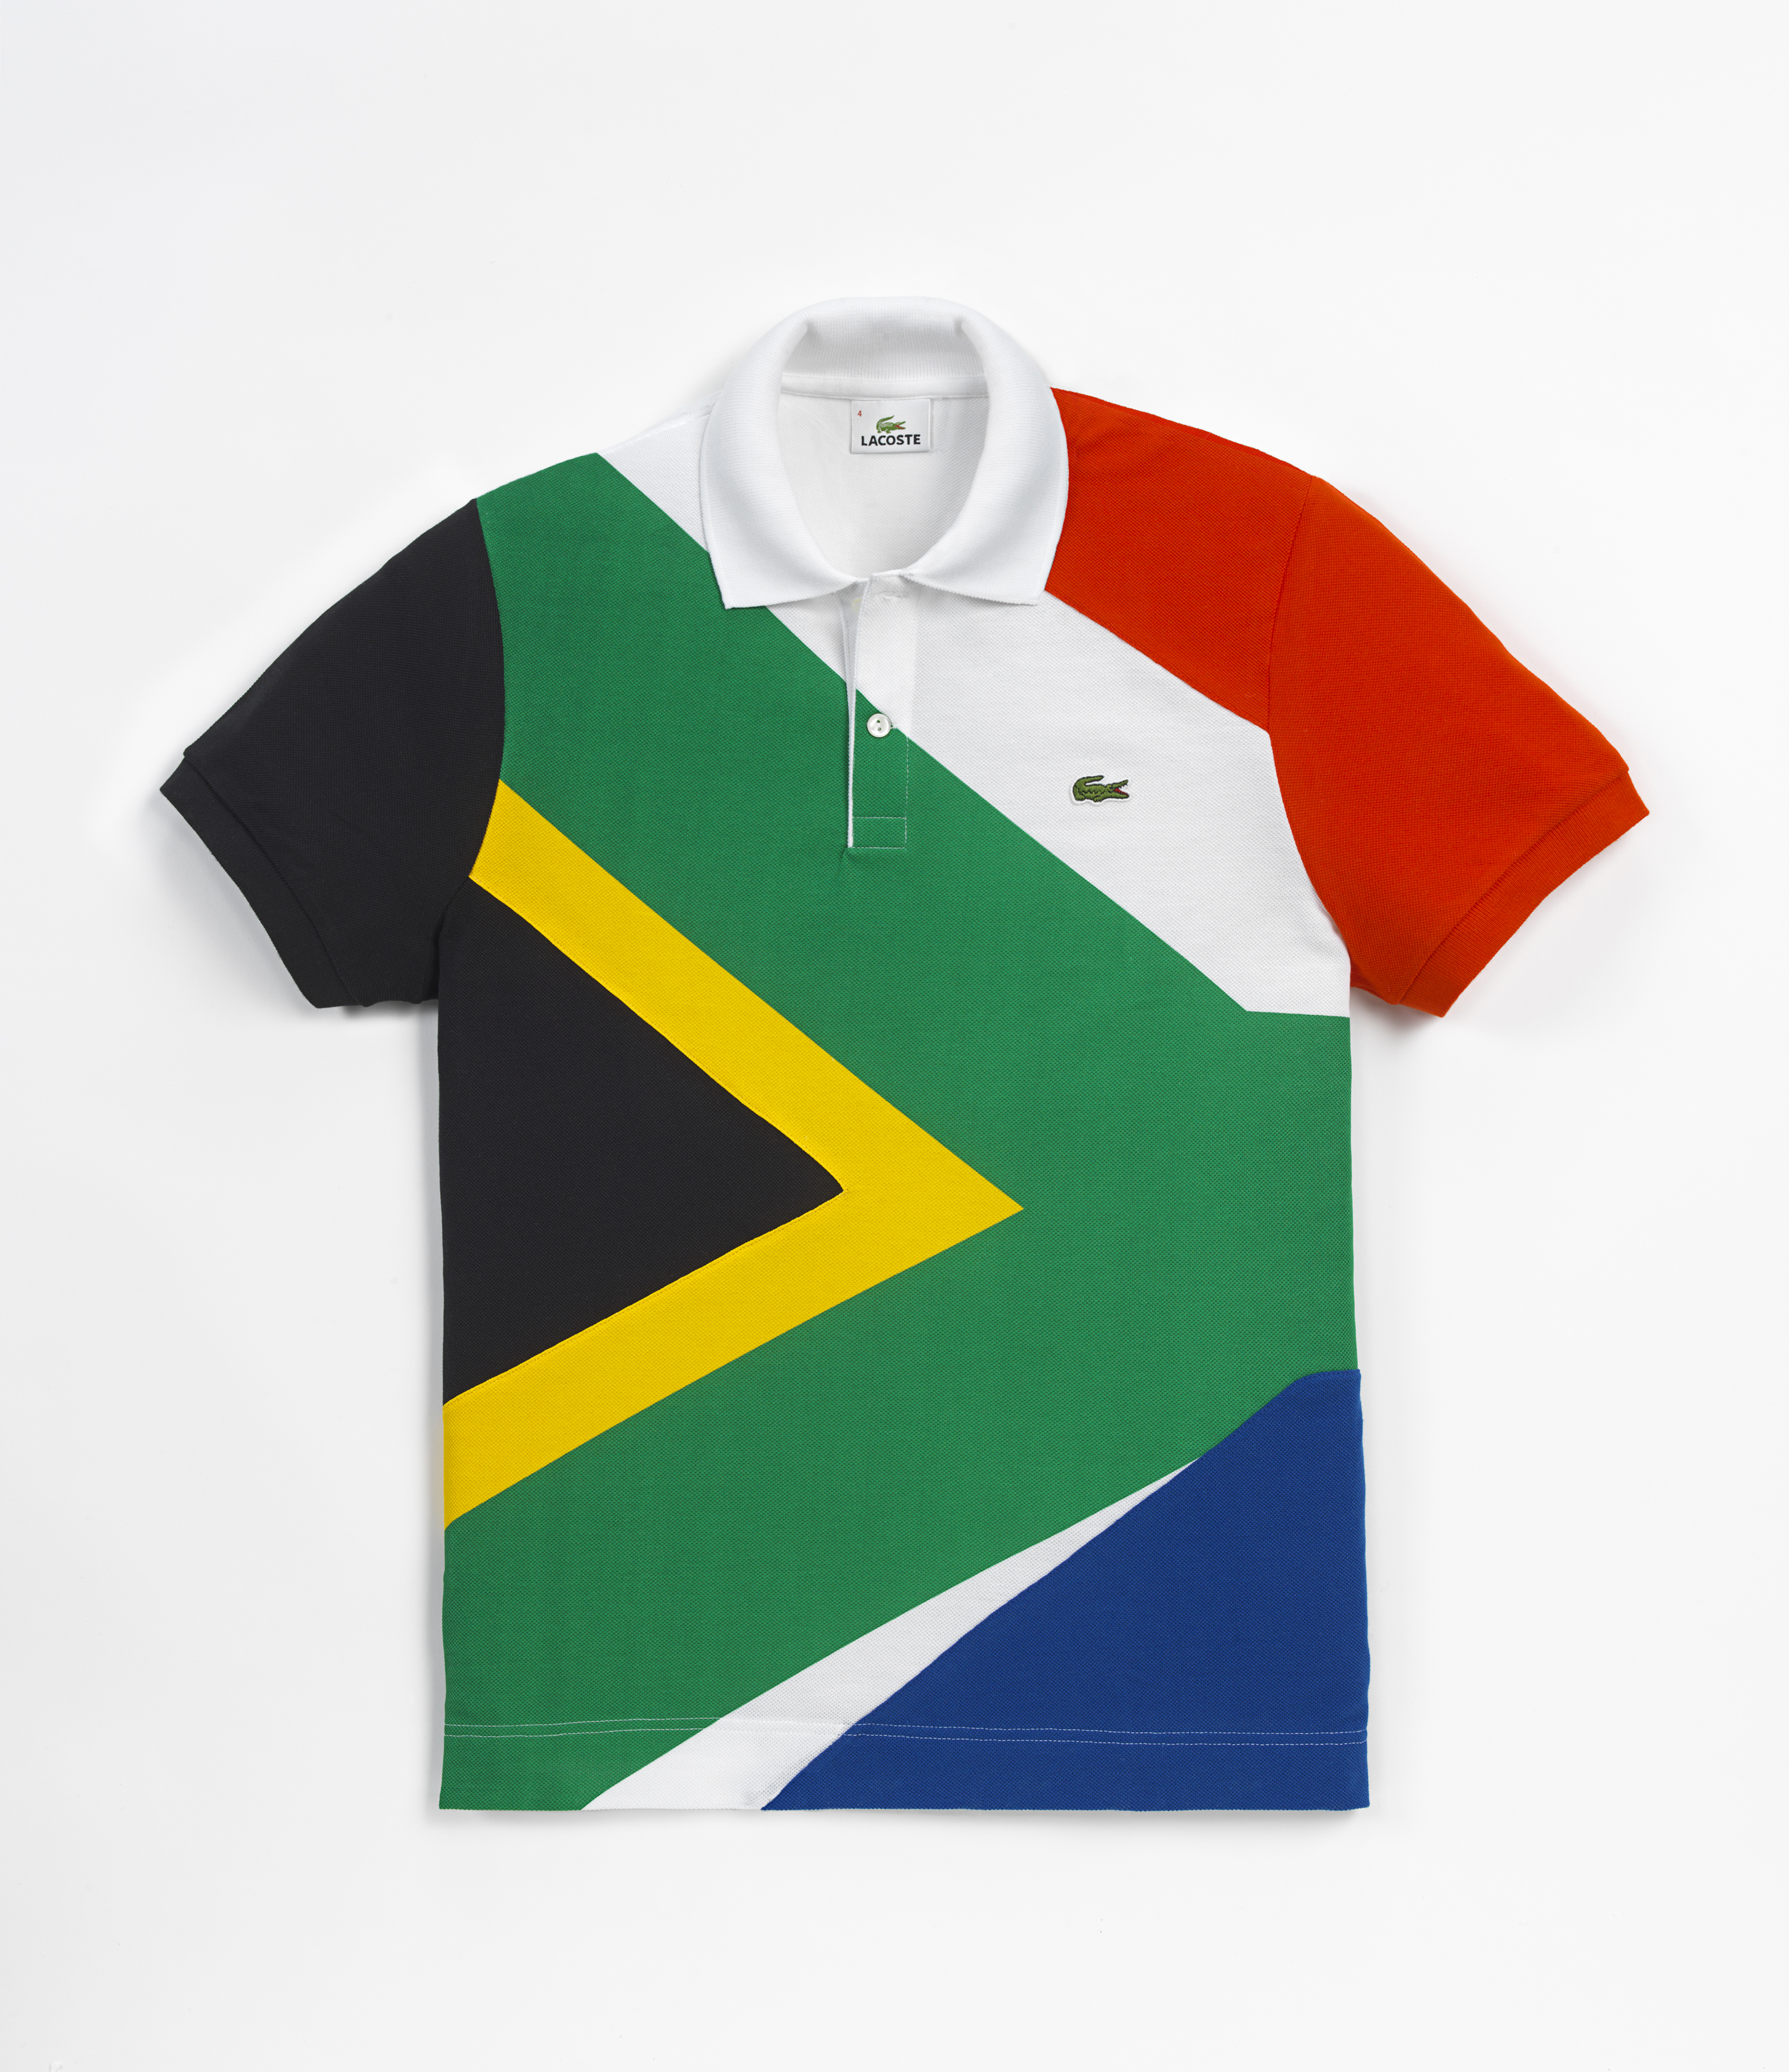 lacoste south africa